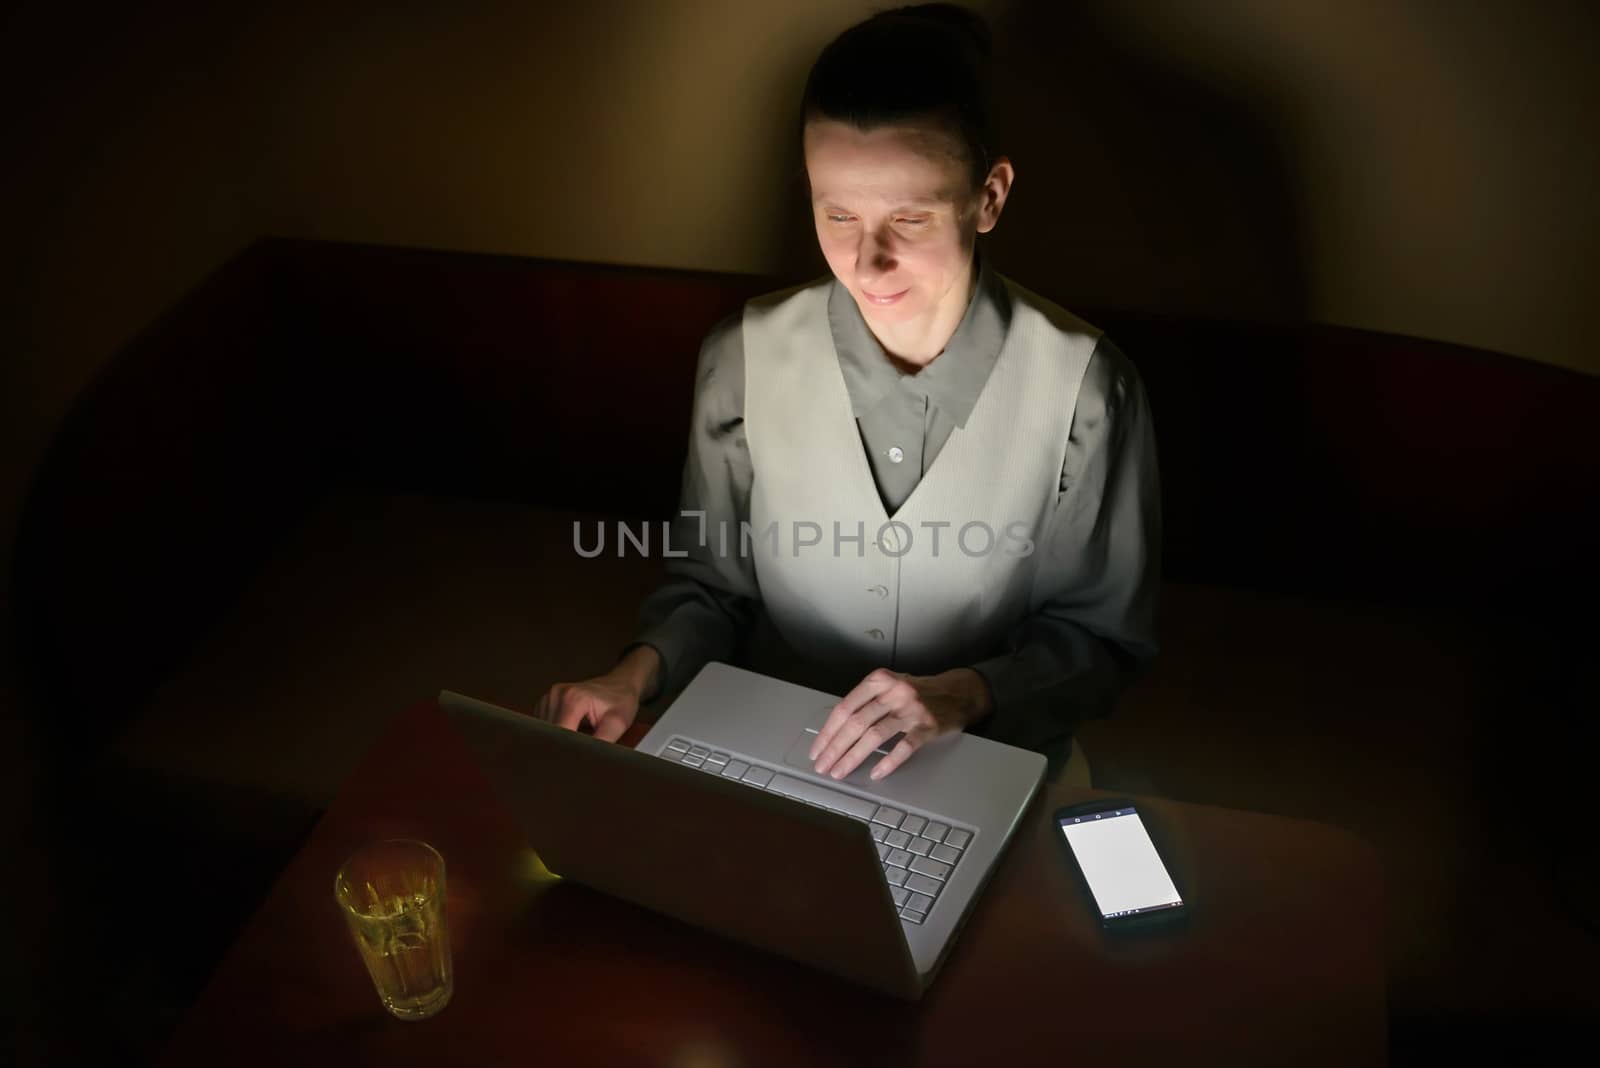 Woman at Computer in the Dark by MaxalTamor